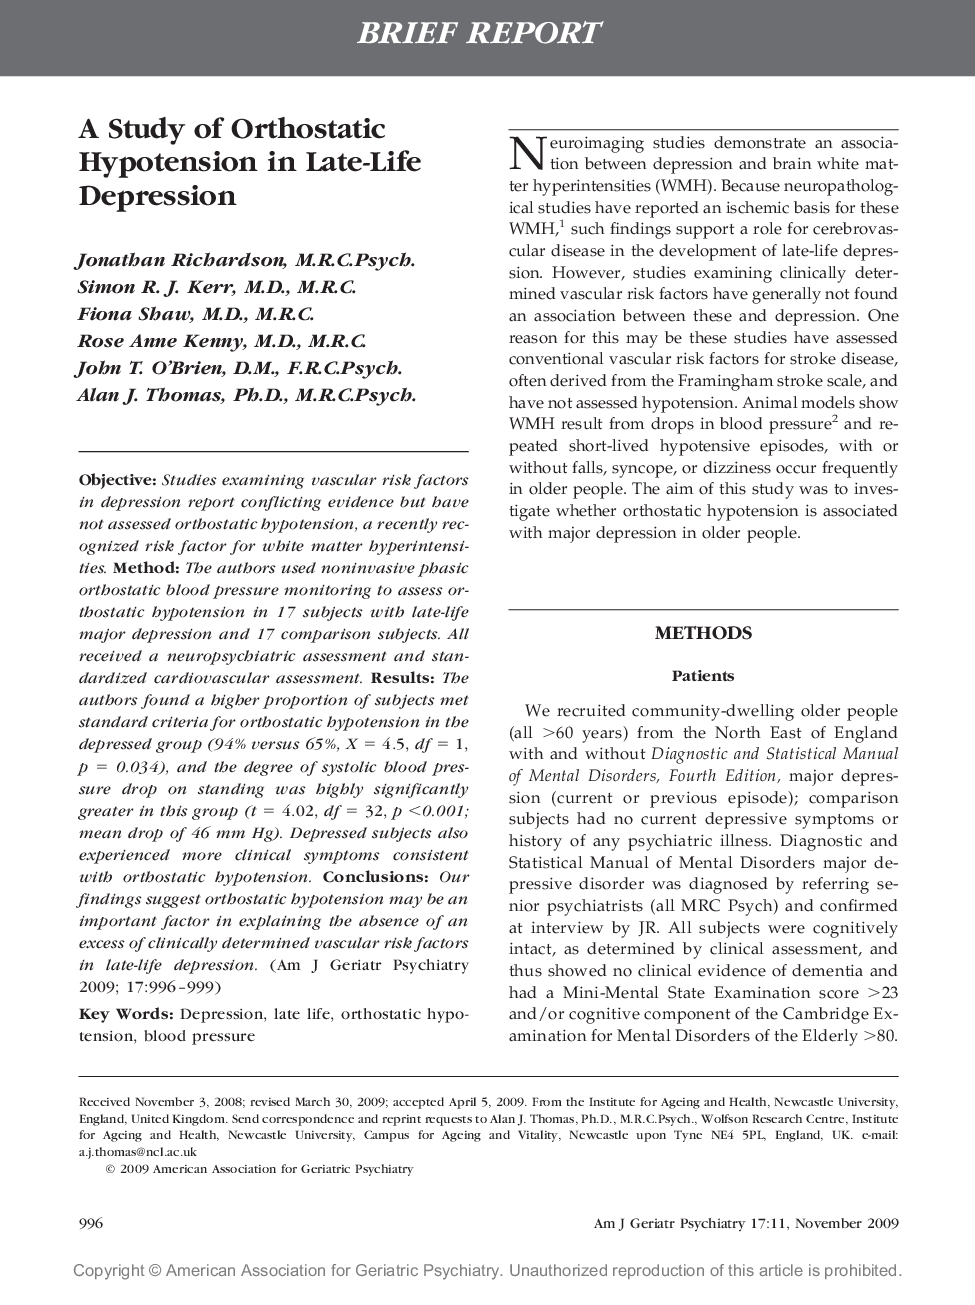 A Study of Orthostatic Hypotension in Late-Life Depression